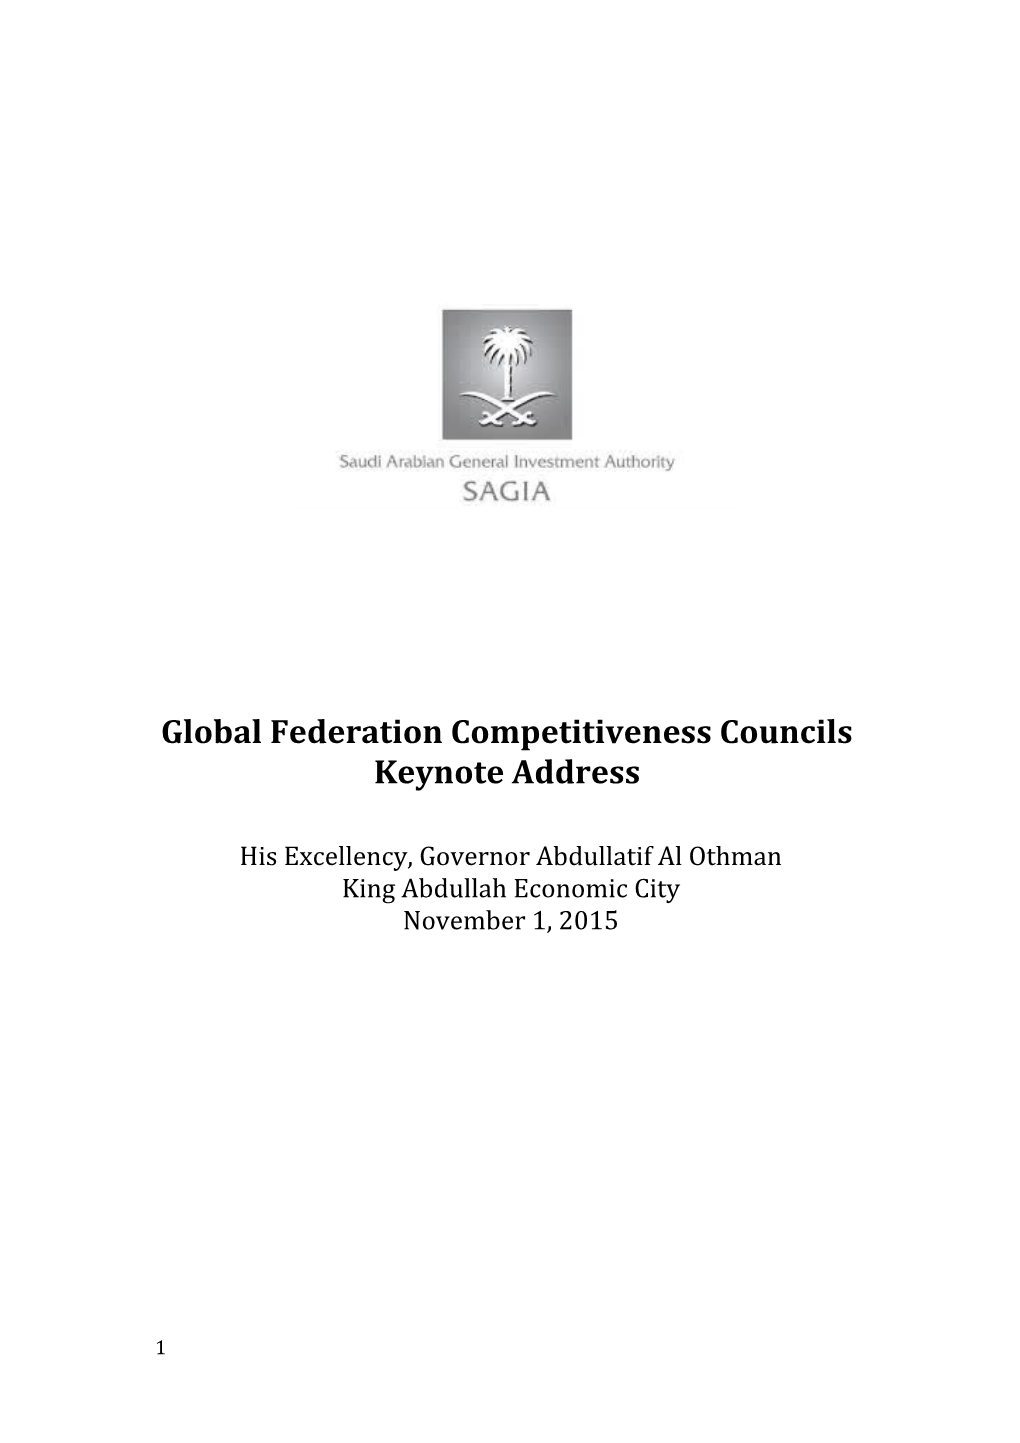 Global Federation Competitiveness Council